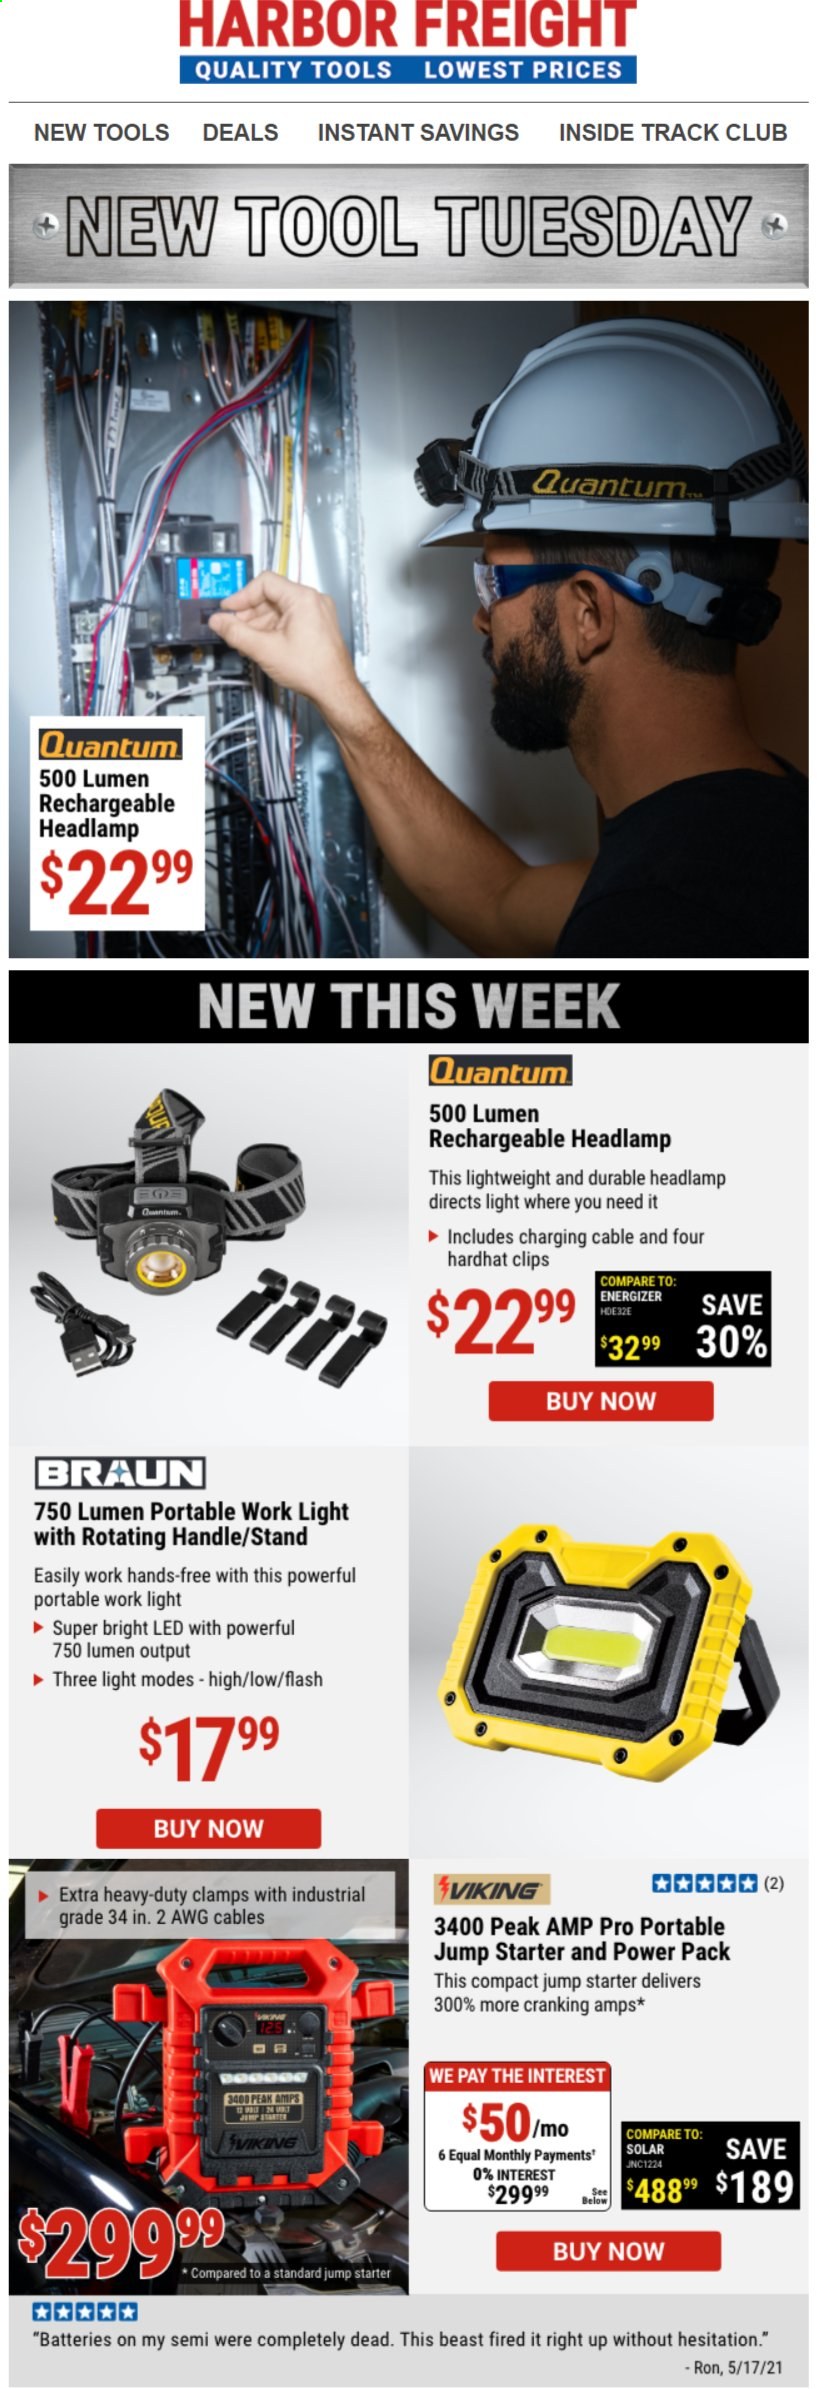 thumbnail - Harbor Freight Flyer - Sales products - Energizer, Braun, headlamp, work light, starter. Page 1.